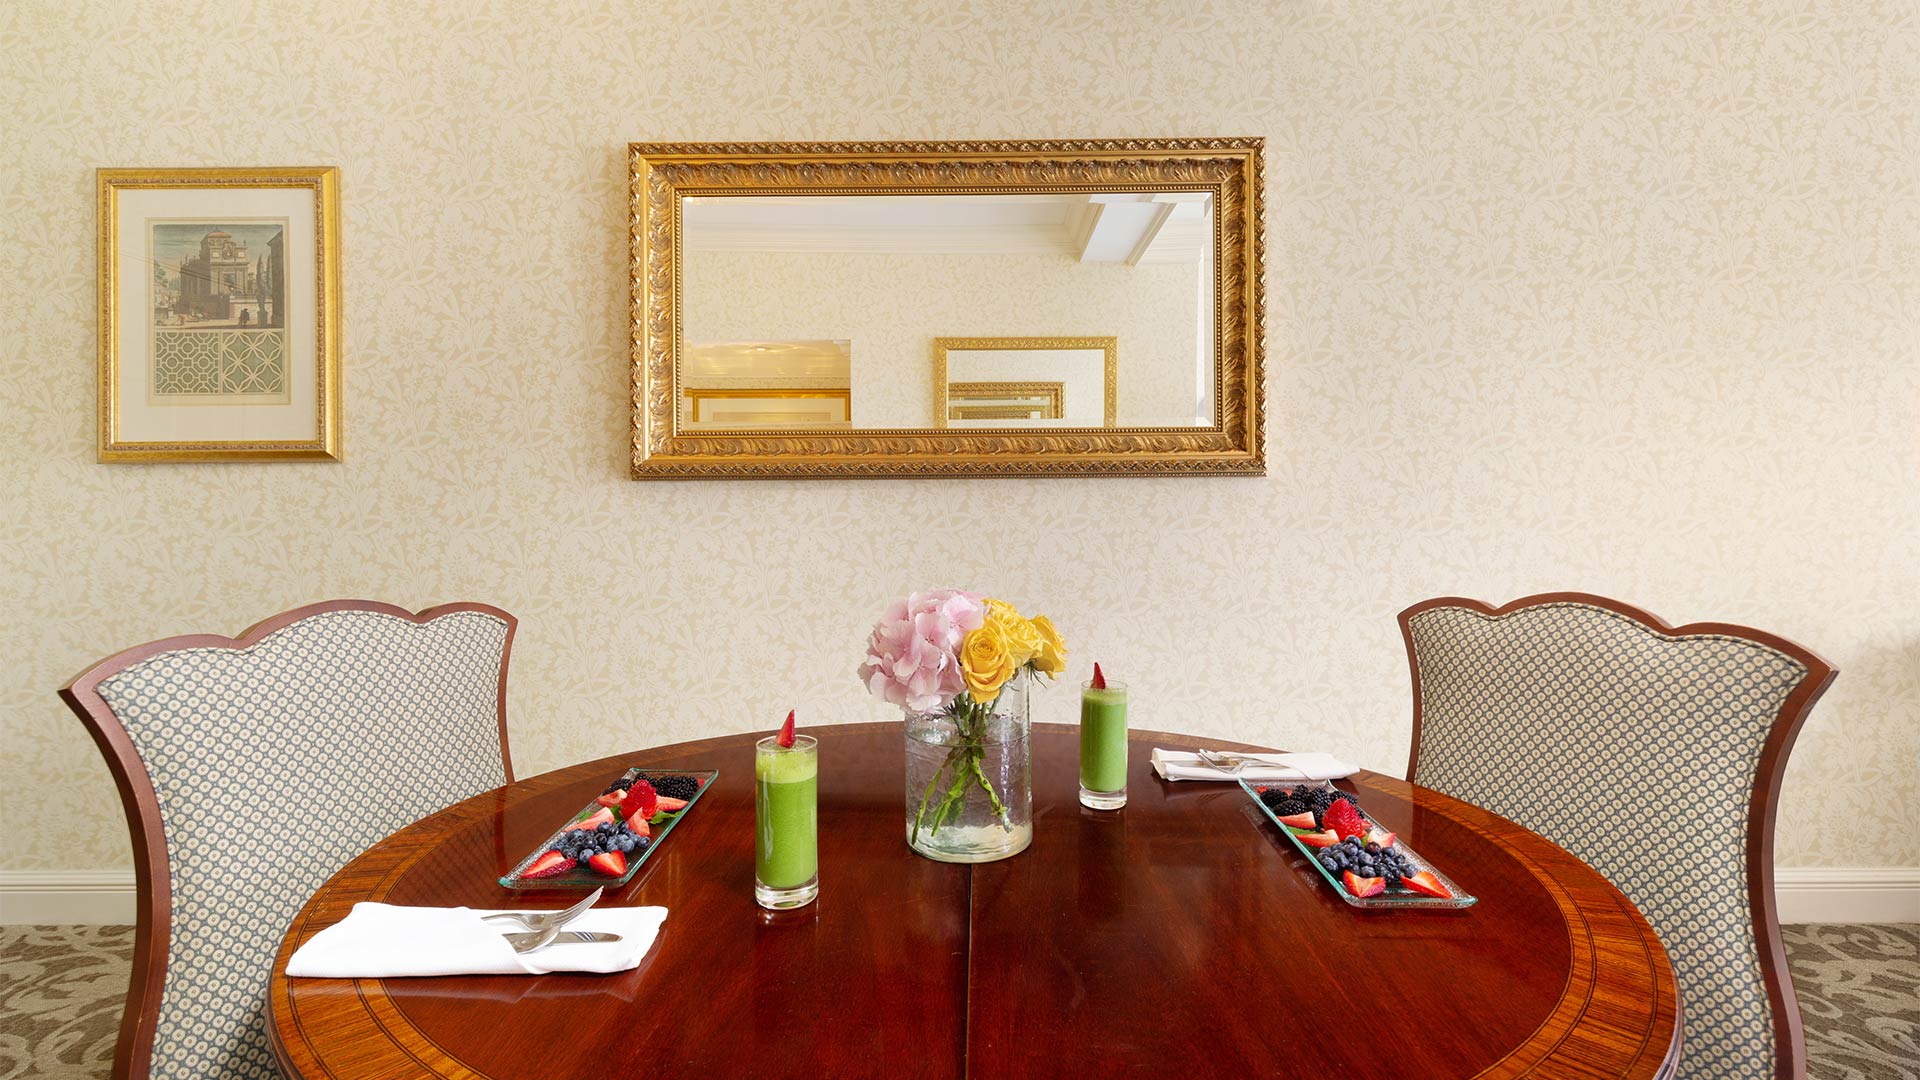 detail shot of the suite's dining area. Two chairs are placed around a circular table. There is breakfast on top of the table.